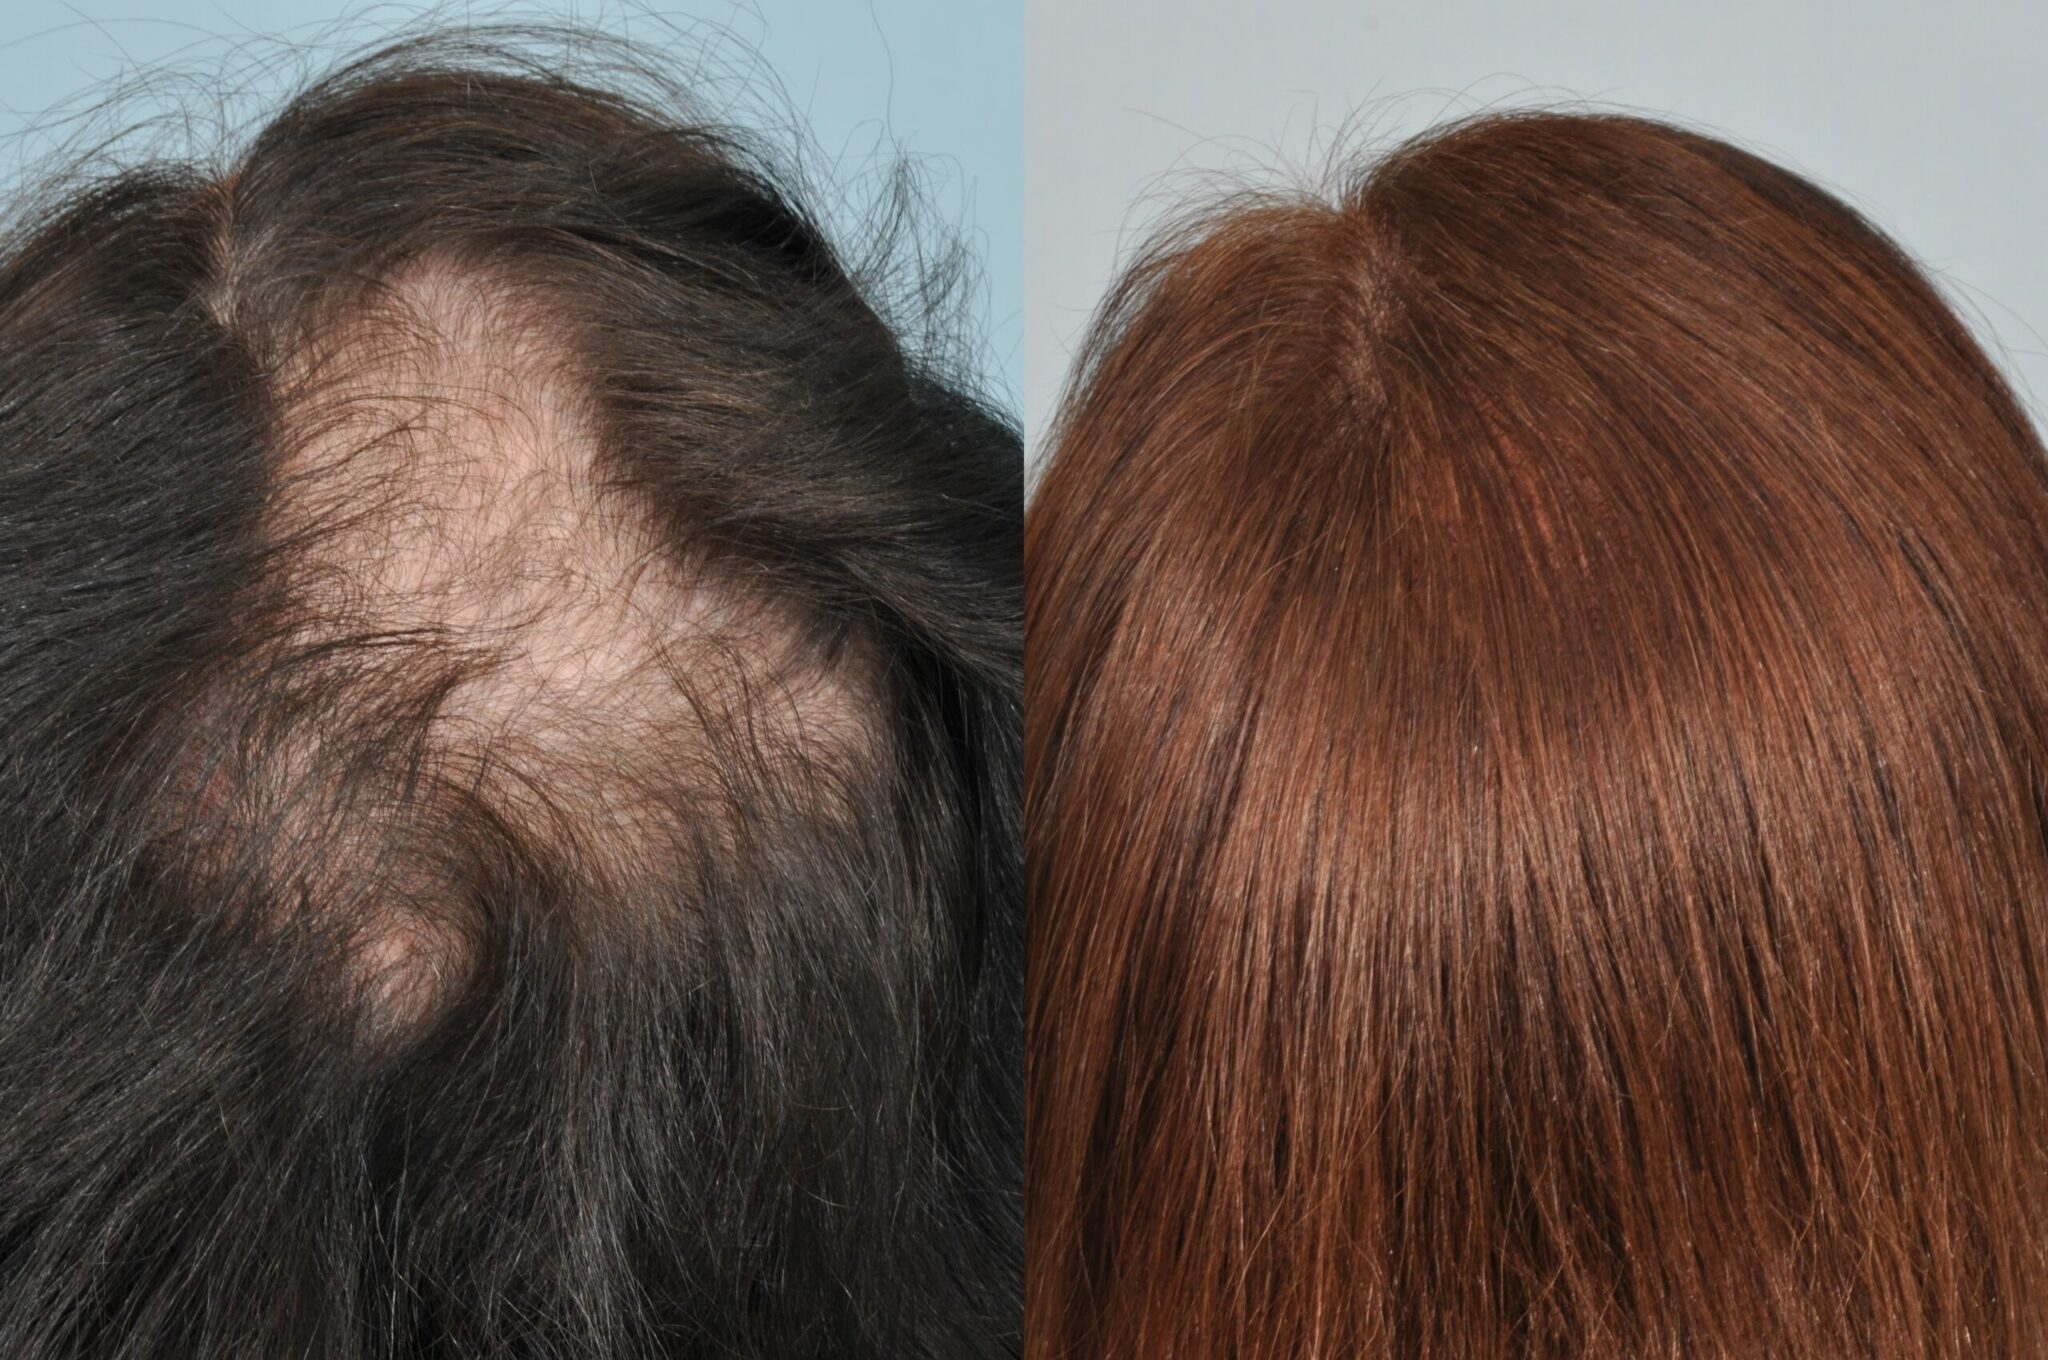 how do dermatologists transplant hair and how long does it take for the new hair to grow scaled